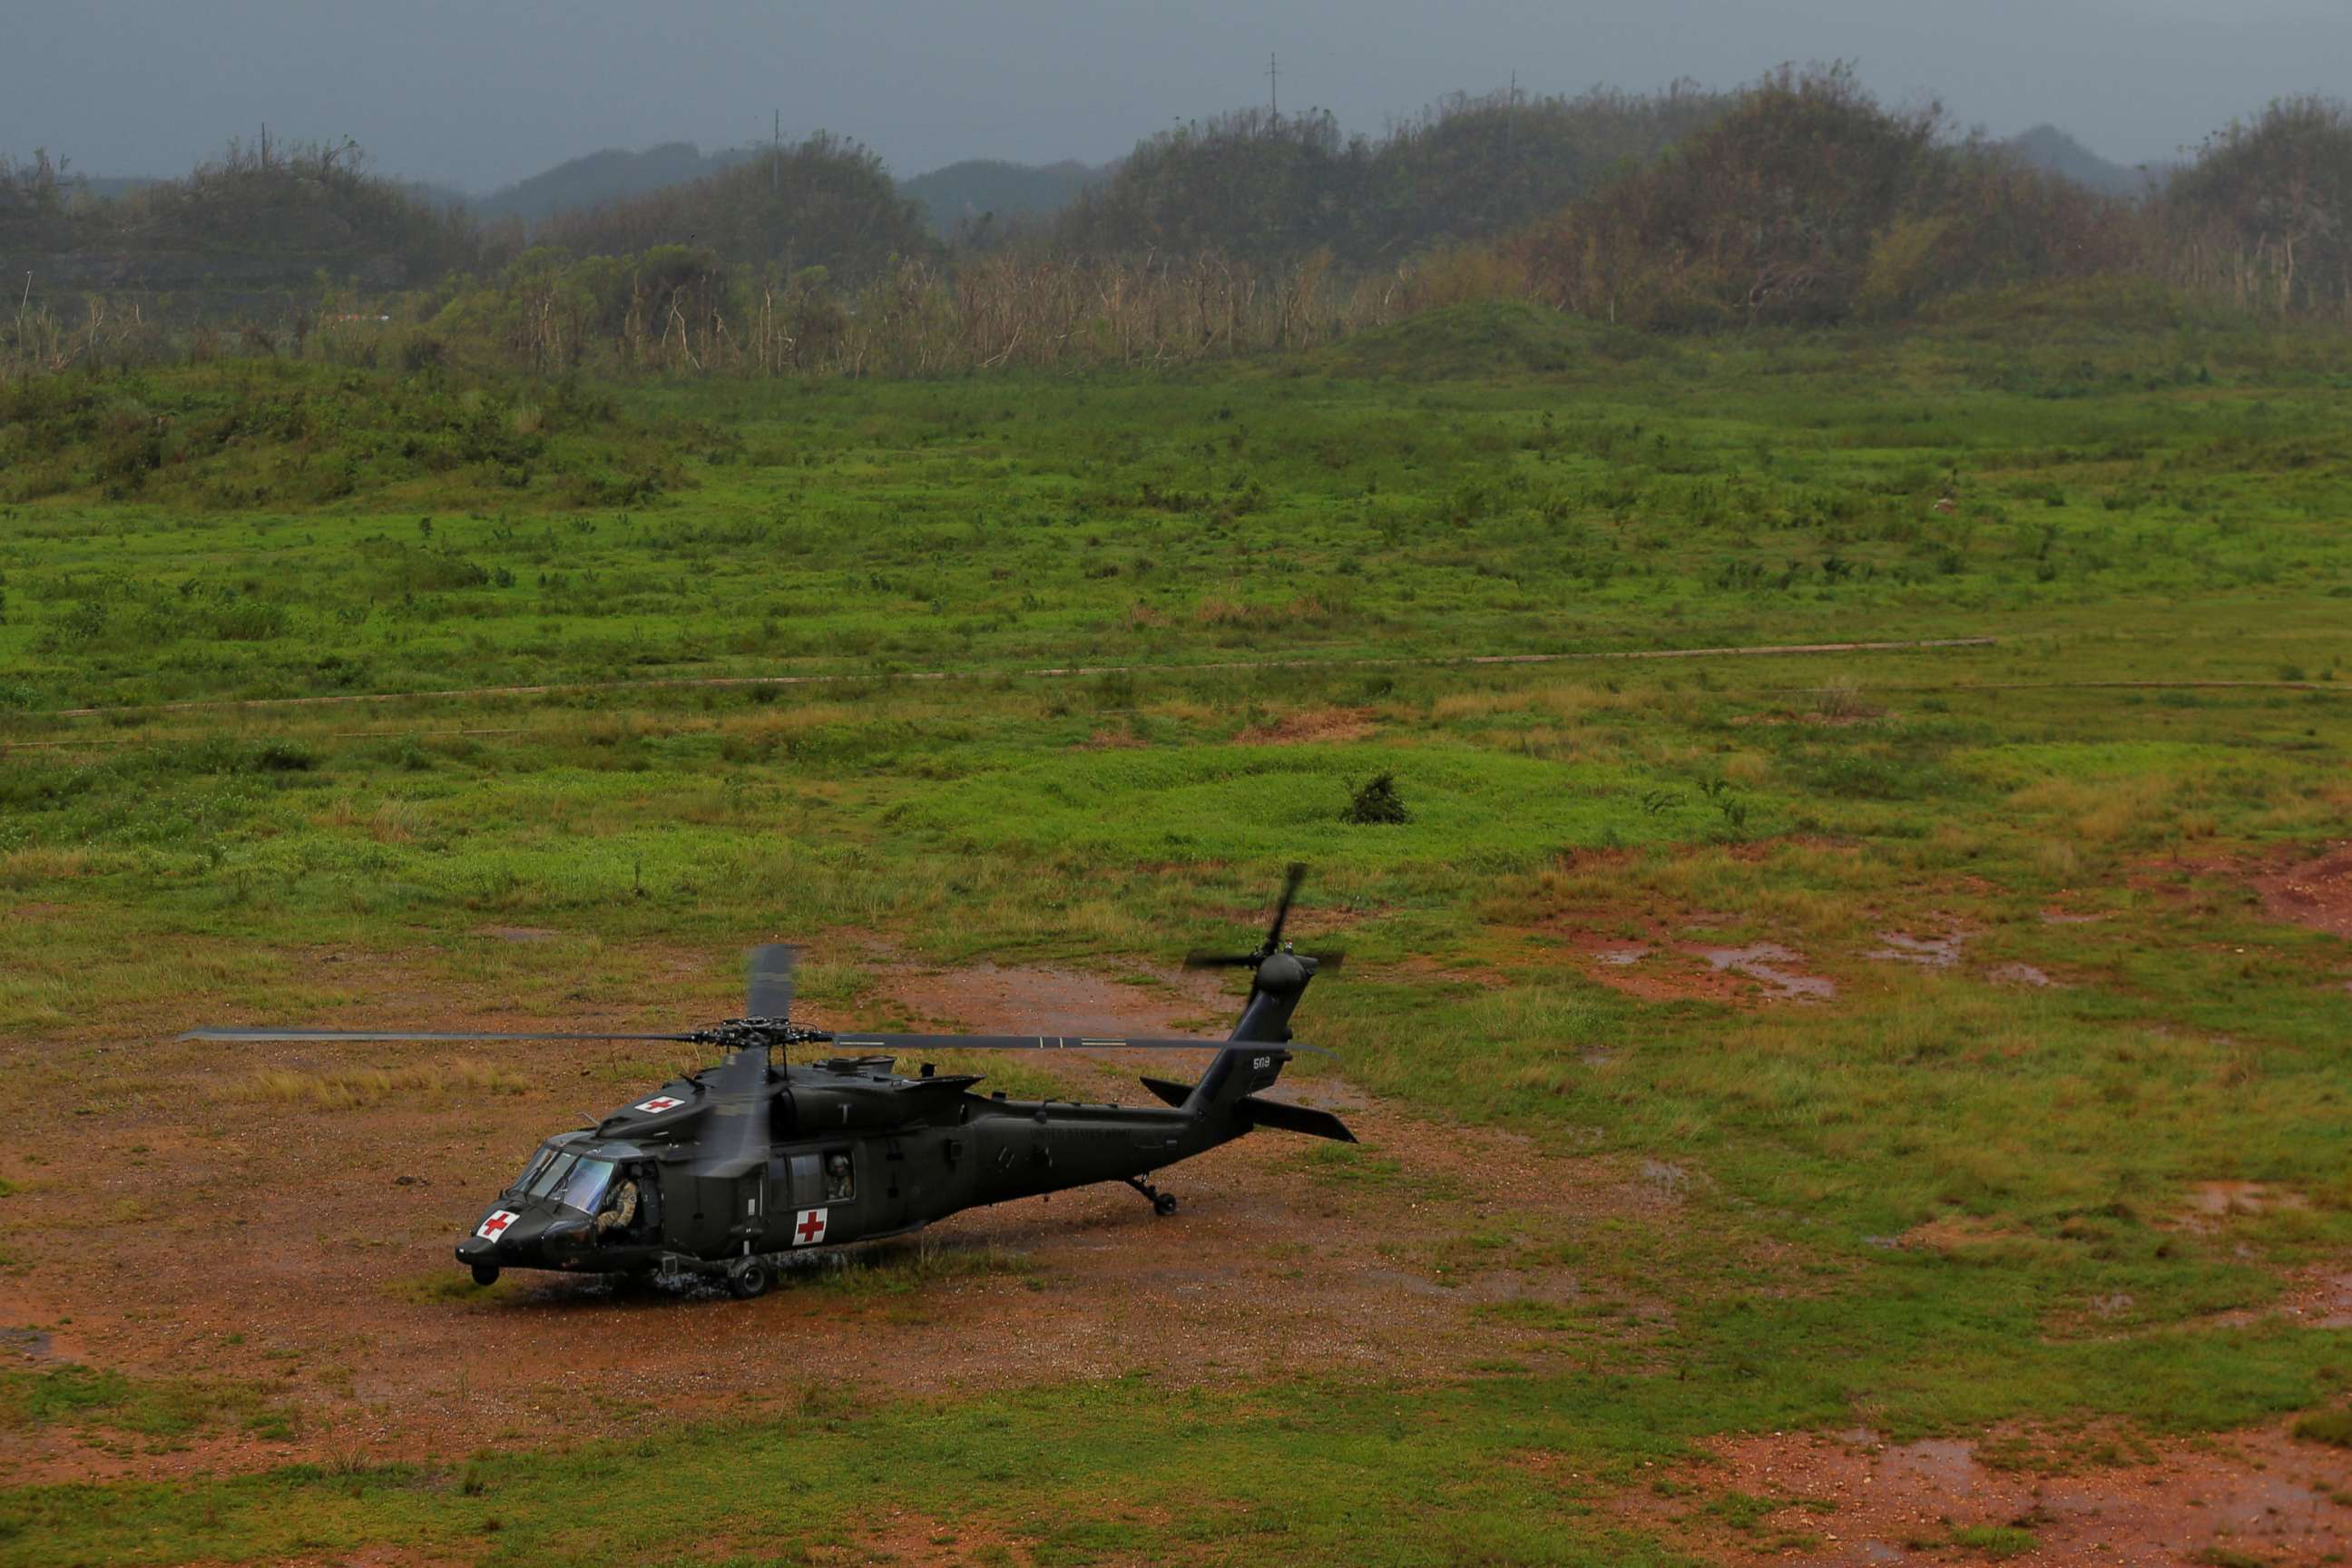 PHOTO: An HH-60 Blackhawk helicopter from 101st Airborne Division's "Dustoff" unit lands in a field to avoid lightning during recovery efforts following Hurricane Maria, in Manati, Puerto Rico, Oct. 5, 2017.